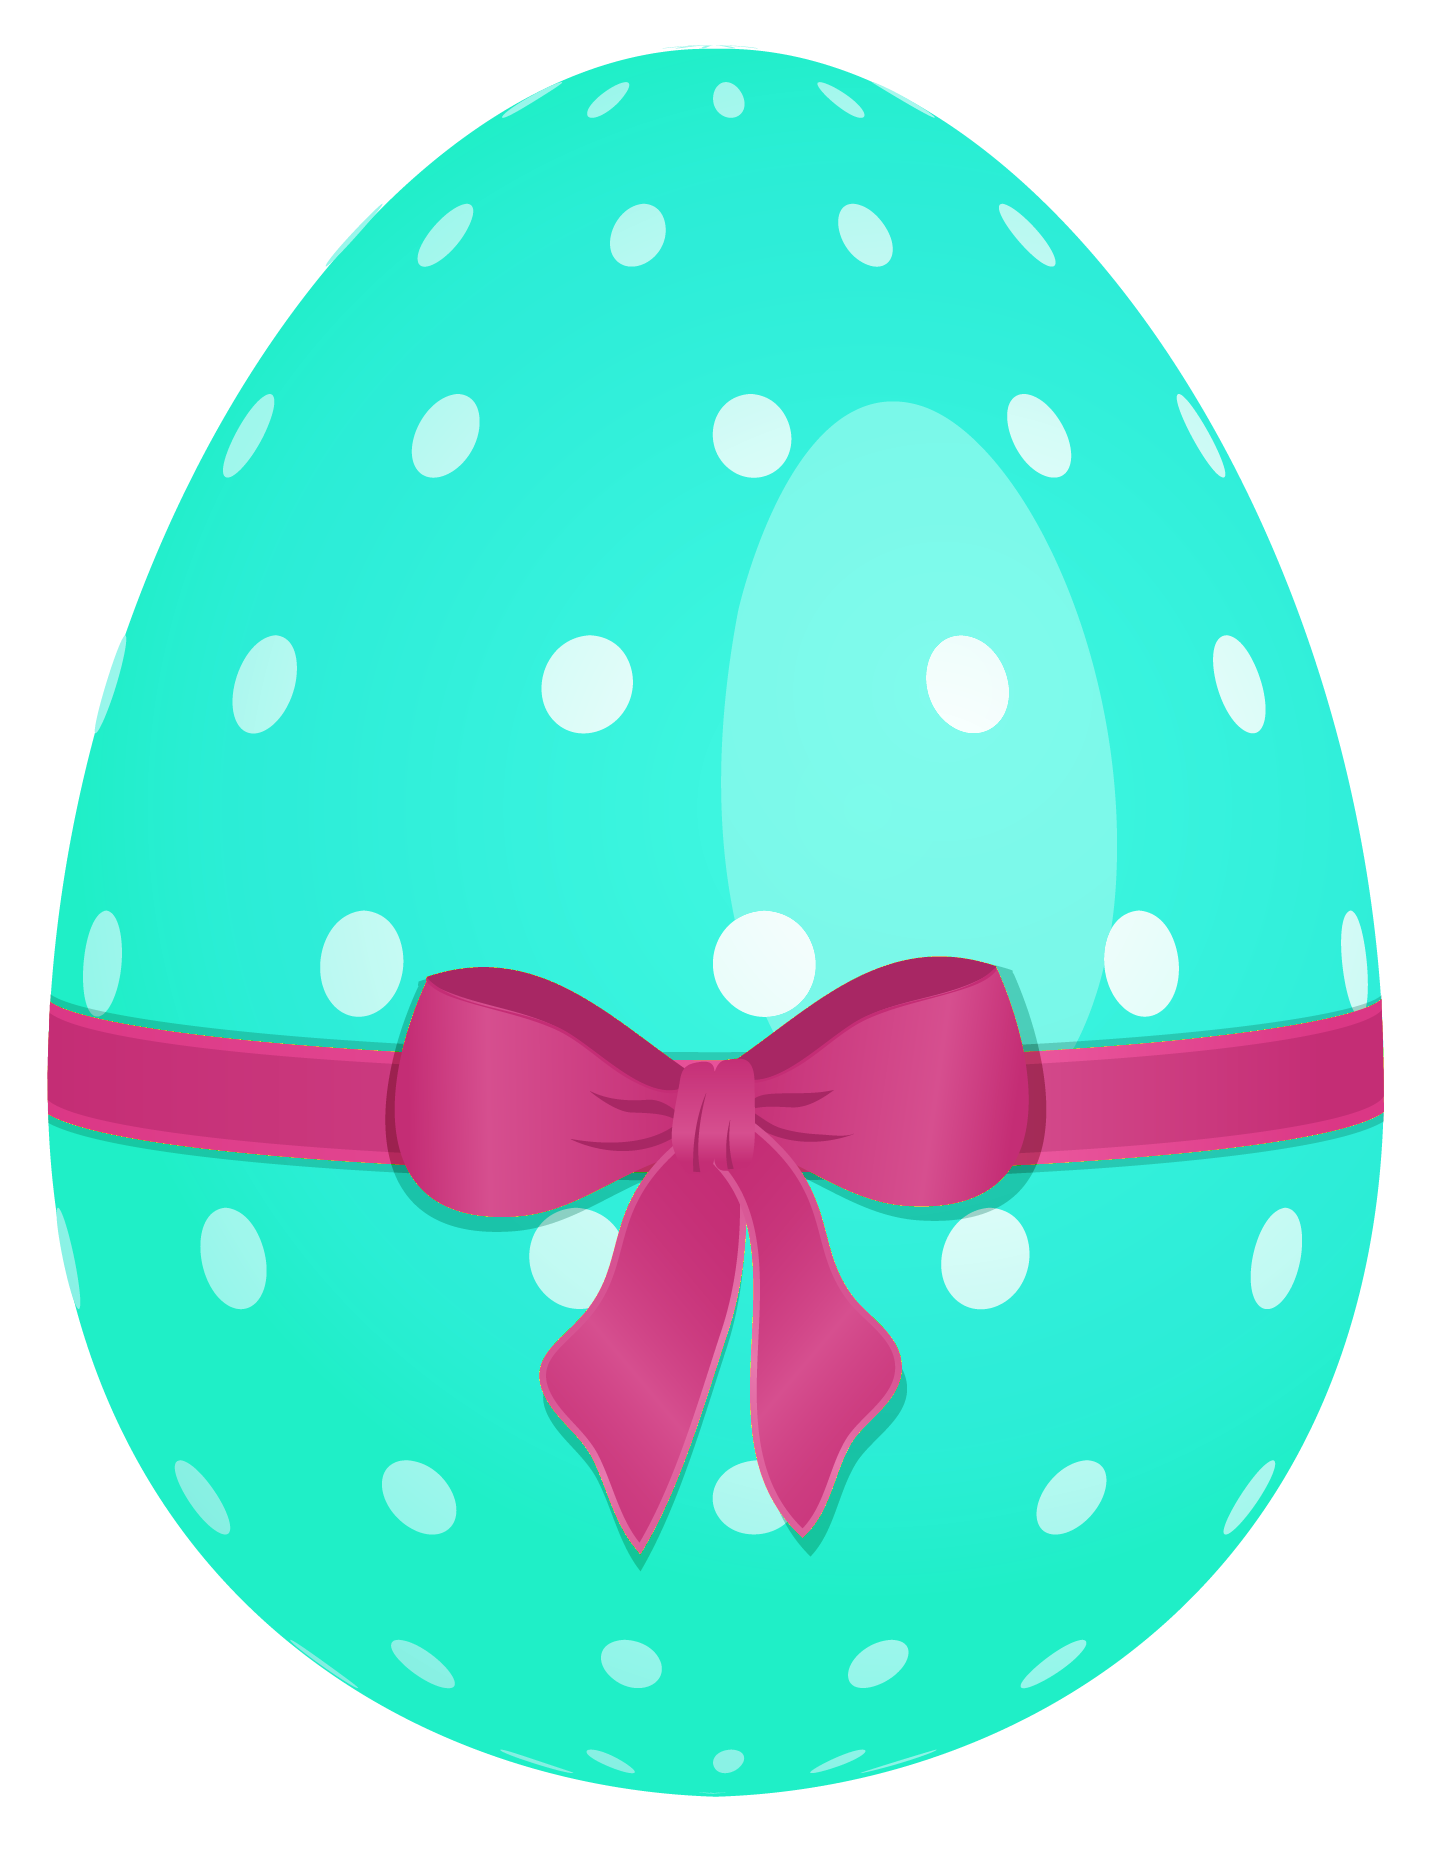 Chocolate Egg PNG Clipart​  Gallery Yopriceville - High-Quality Free  Images and Transparent PNG Clipart